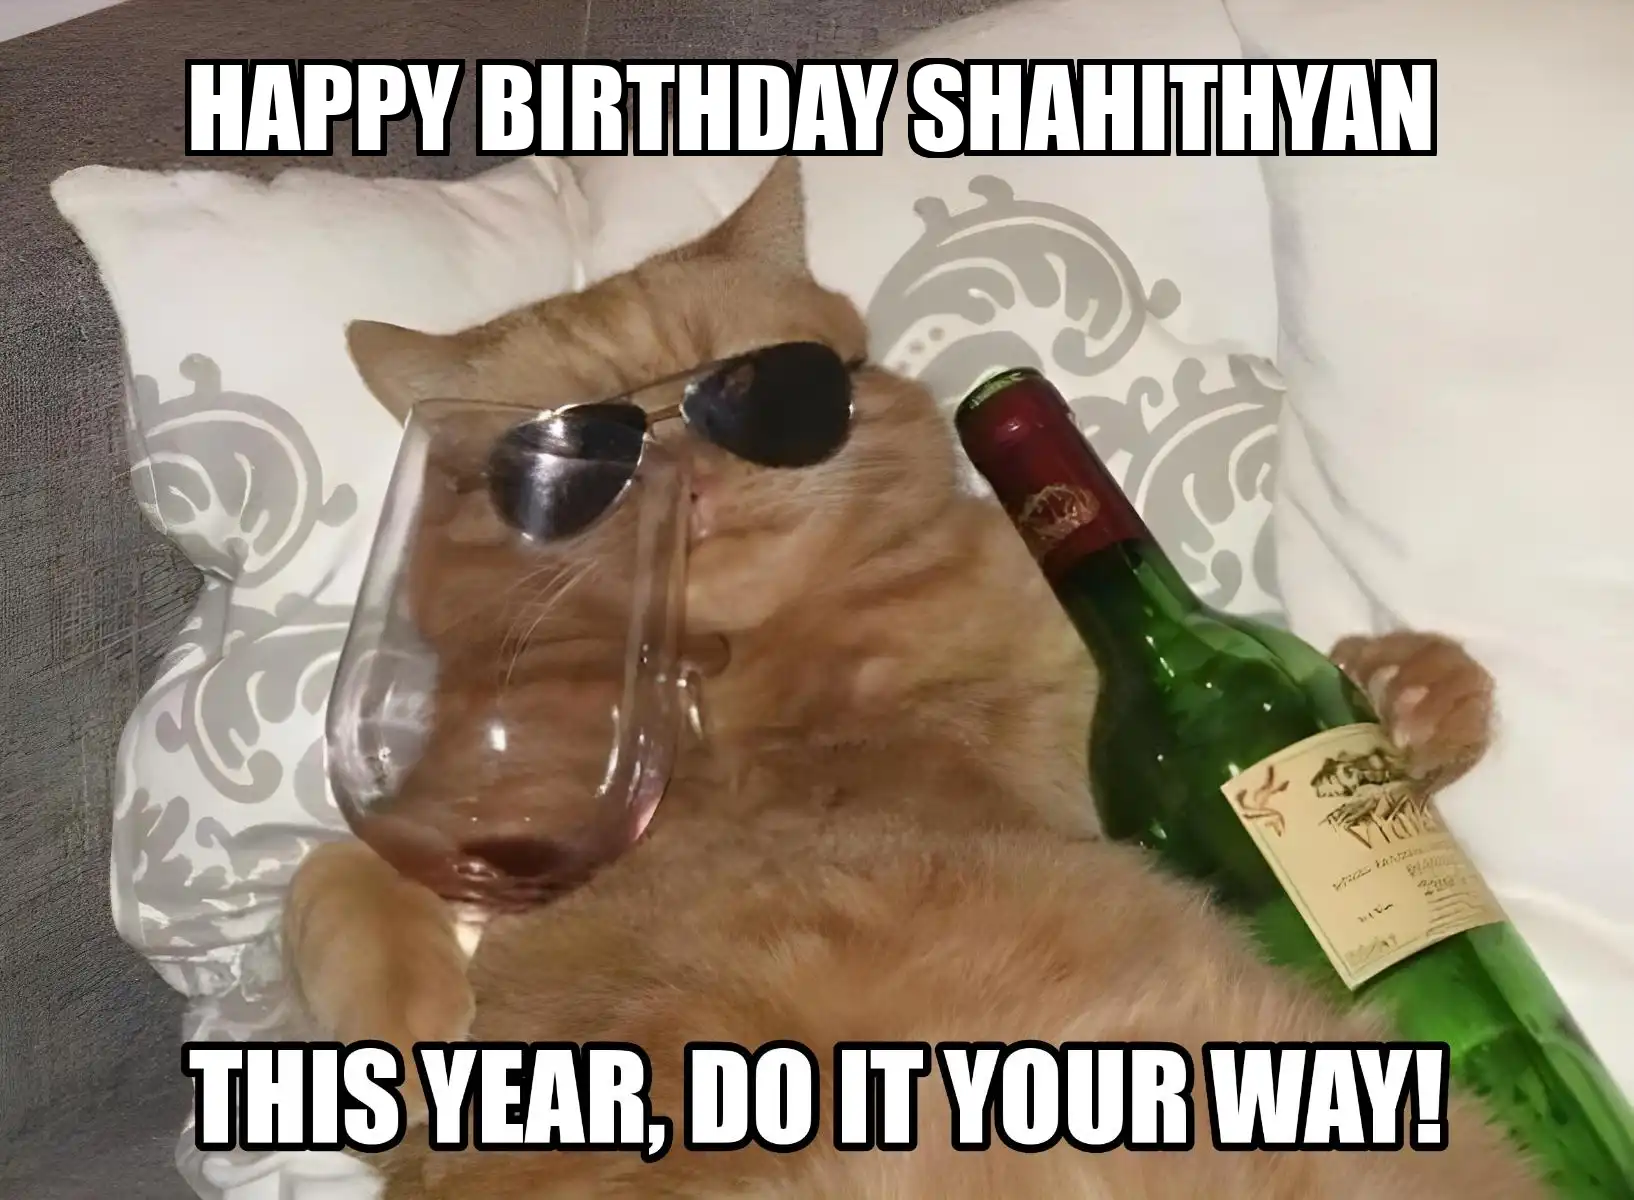 Happy Birthday Shahithyan This Year Do It Your Way Meme